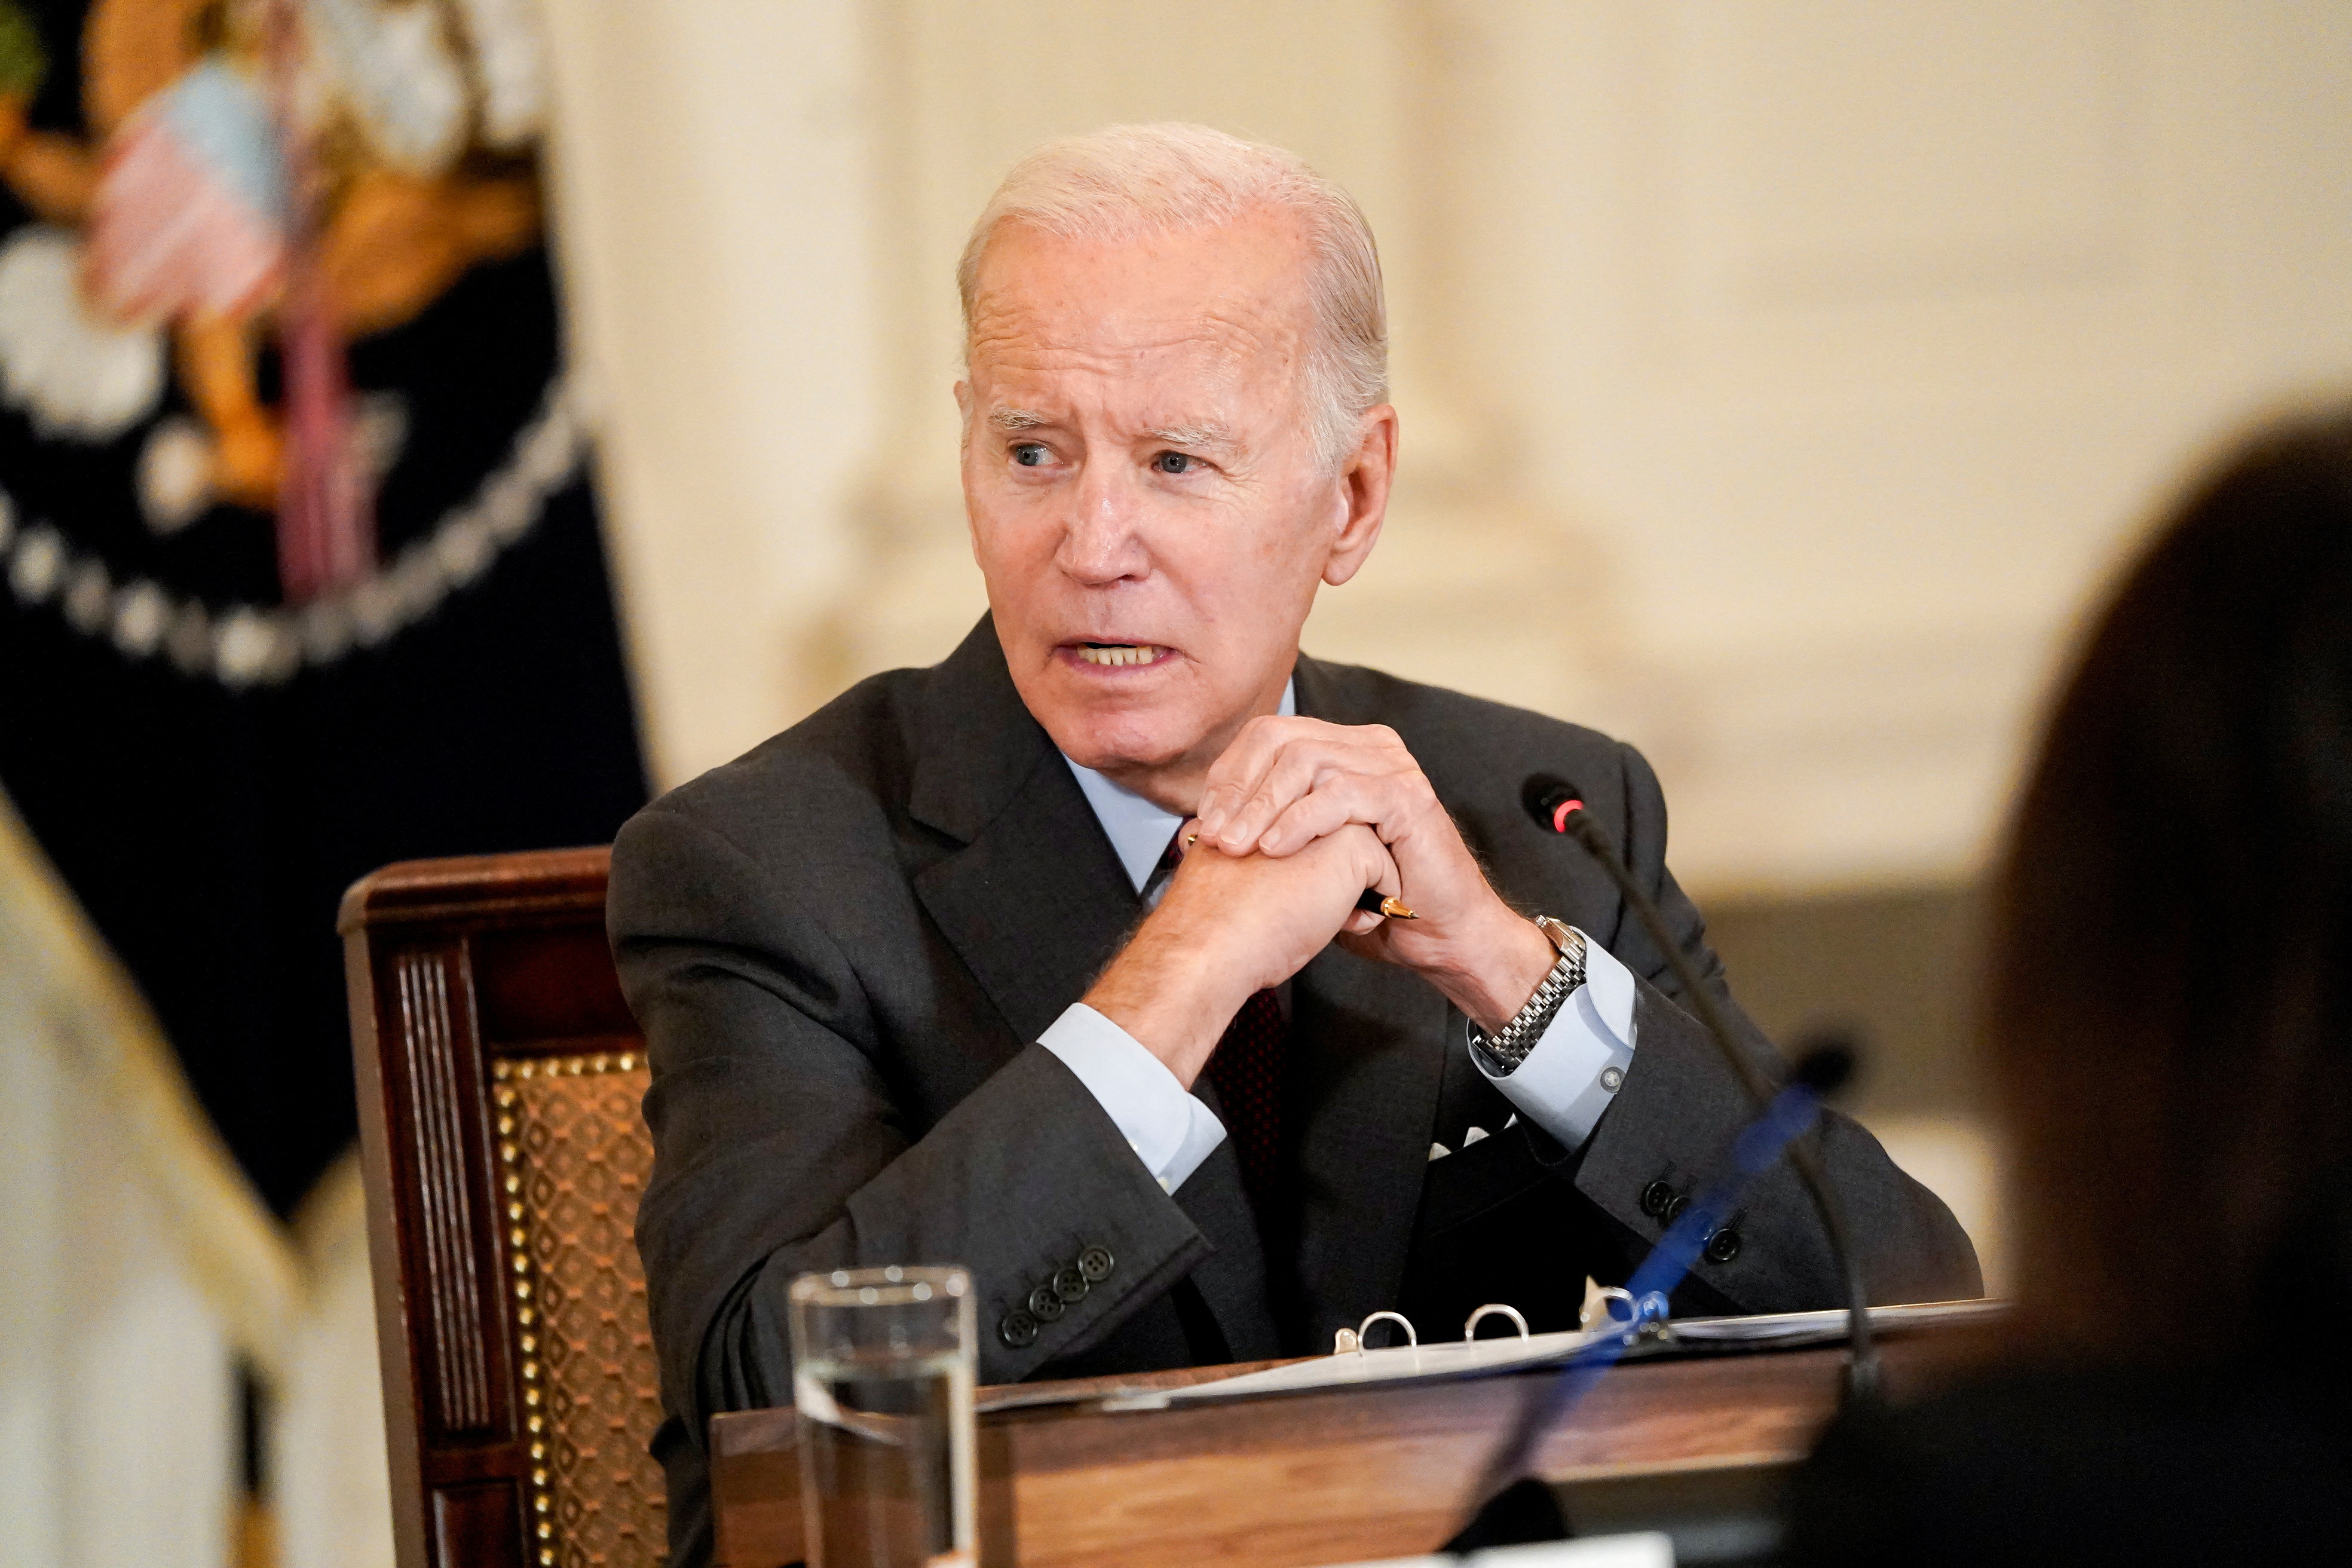 U.S. President Biden and Vice President Harris attend a meeting at the White House